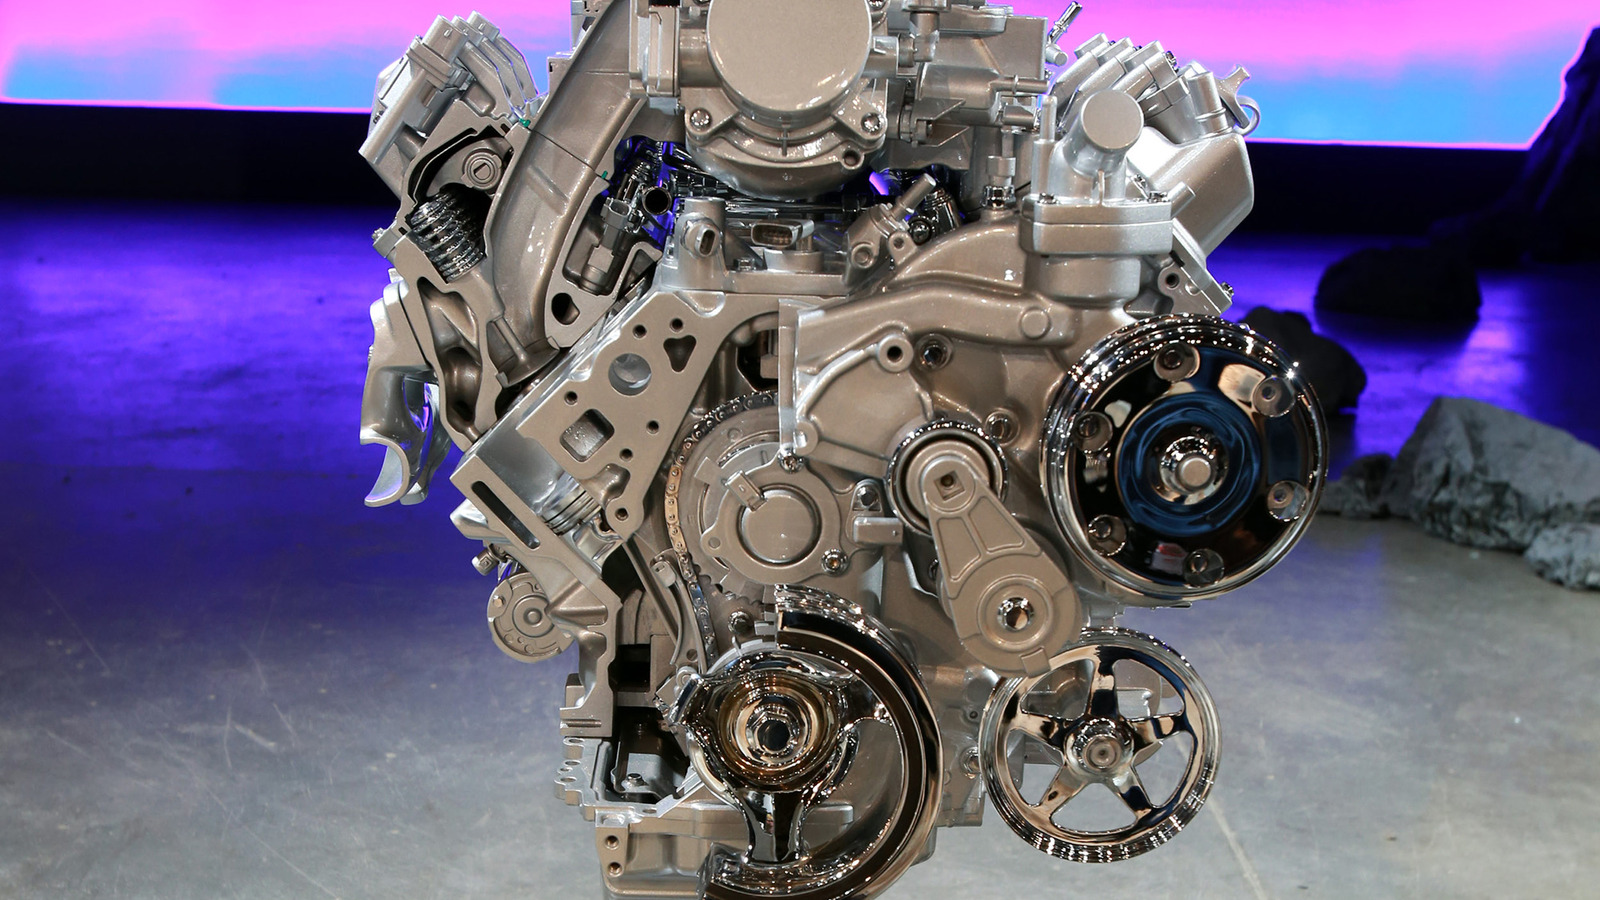 GM 5.3 Liter V8 Ecotec3 L83 Engine: Specs, Performance, and Everything You Need to Know